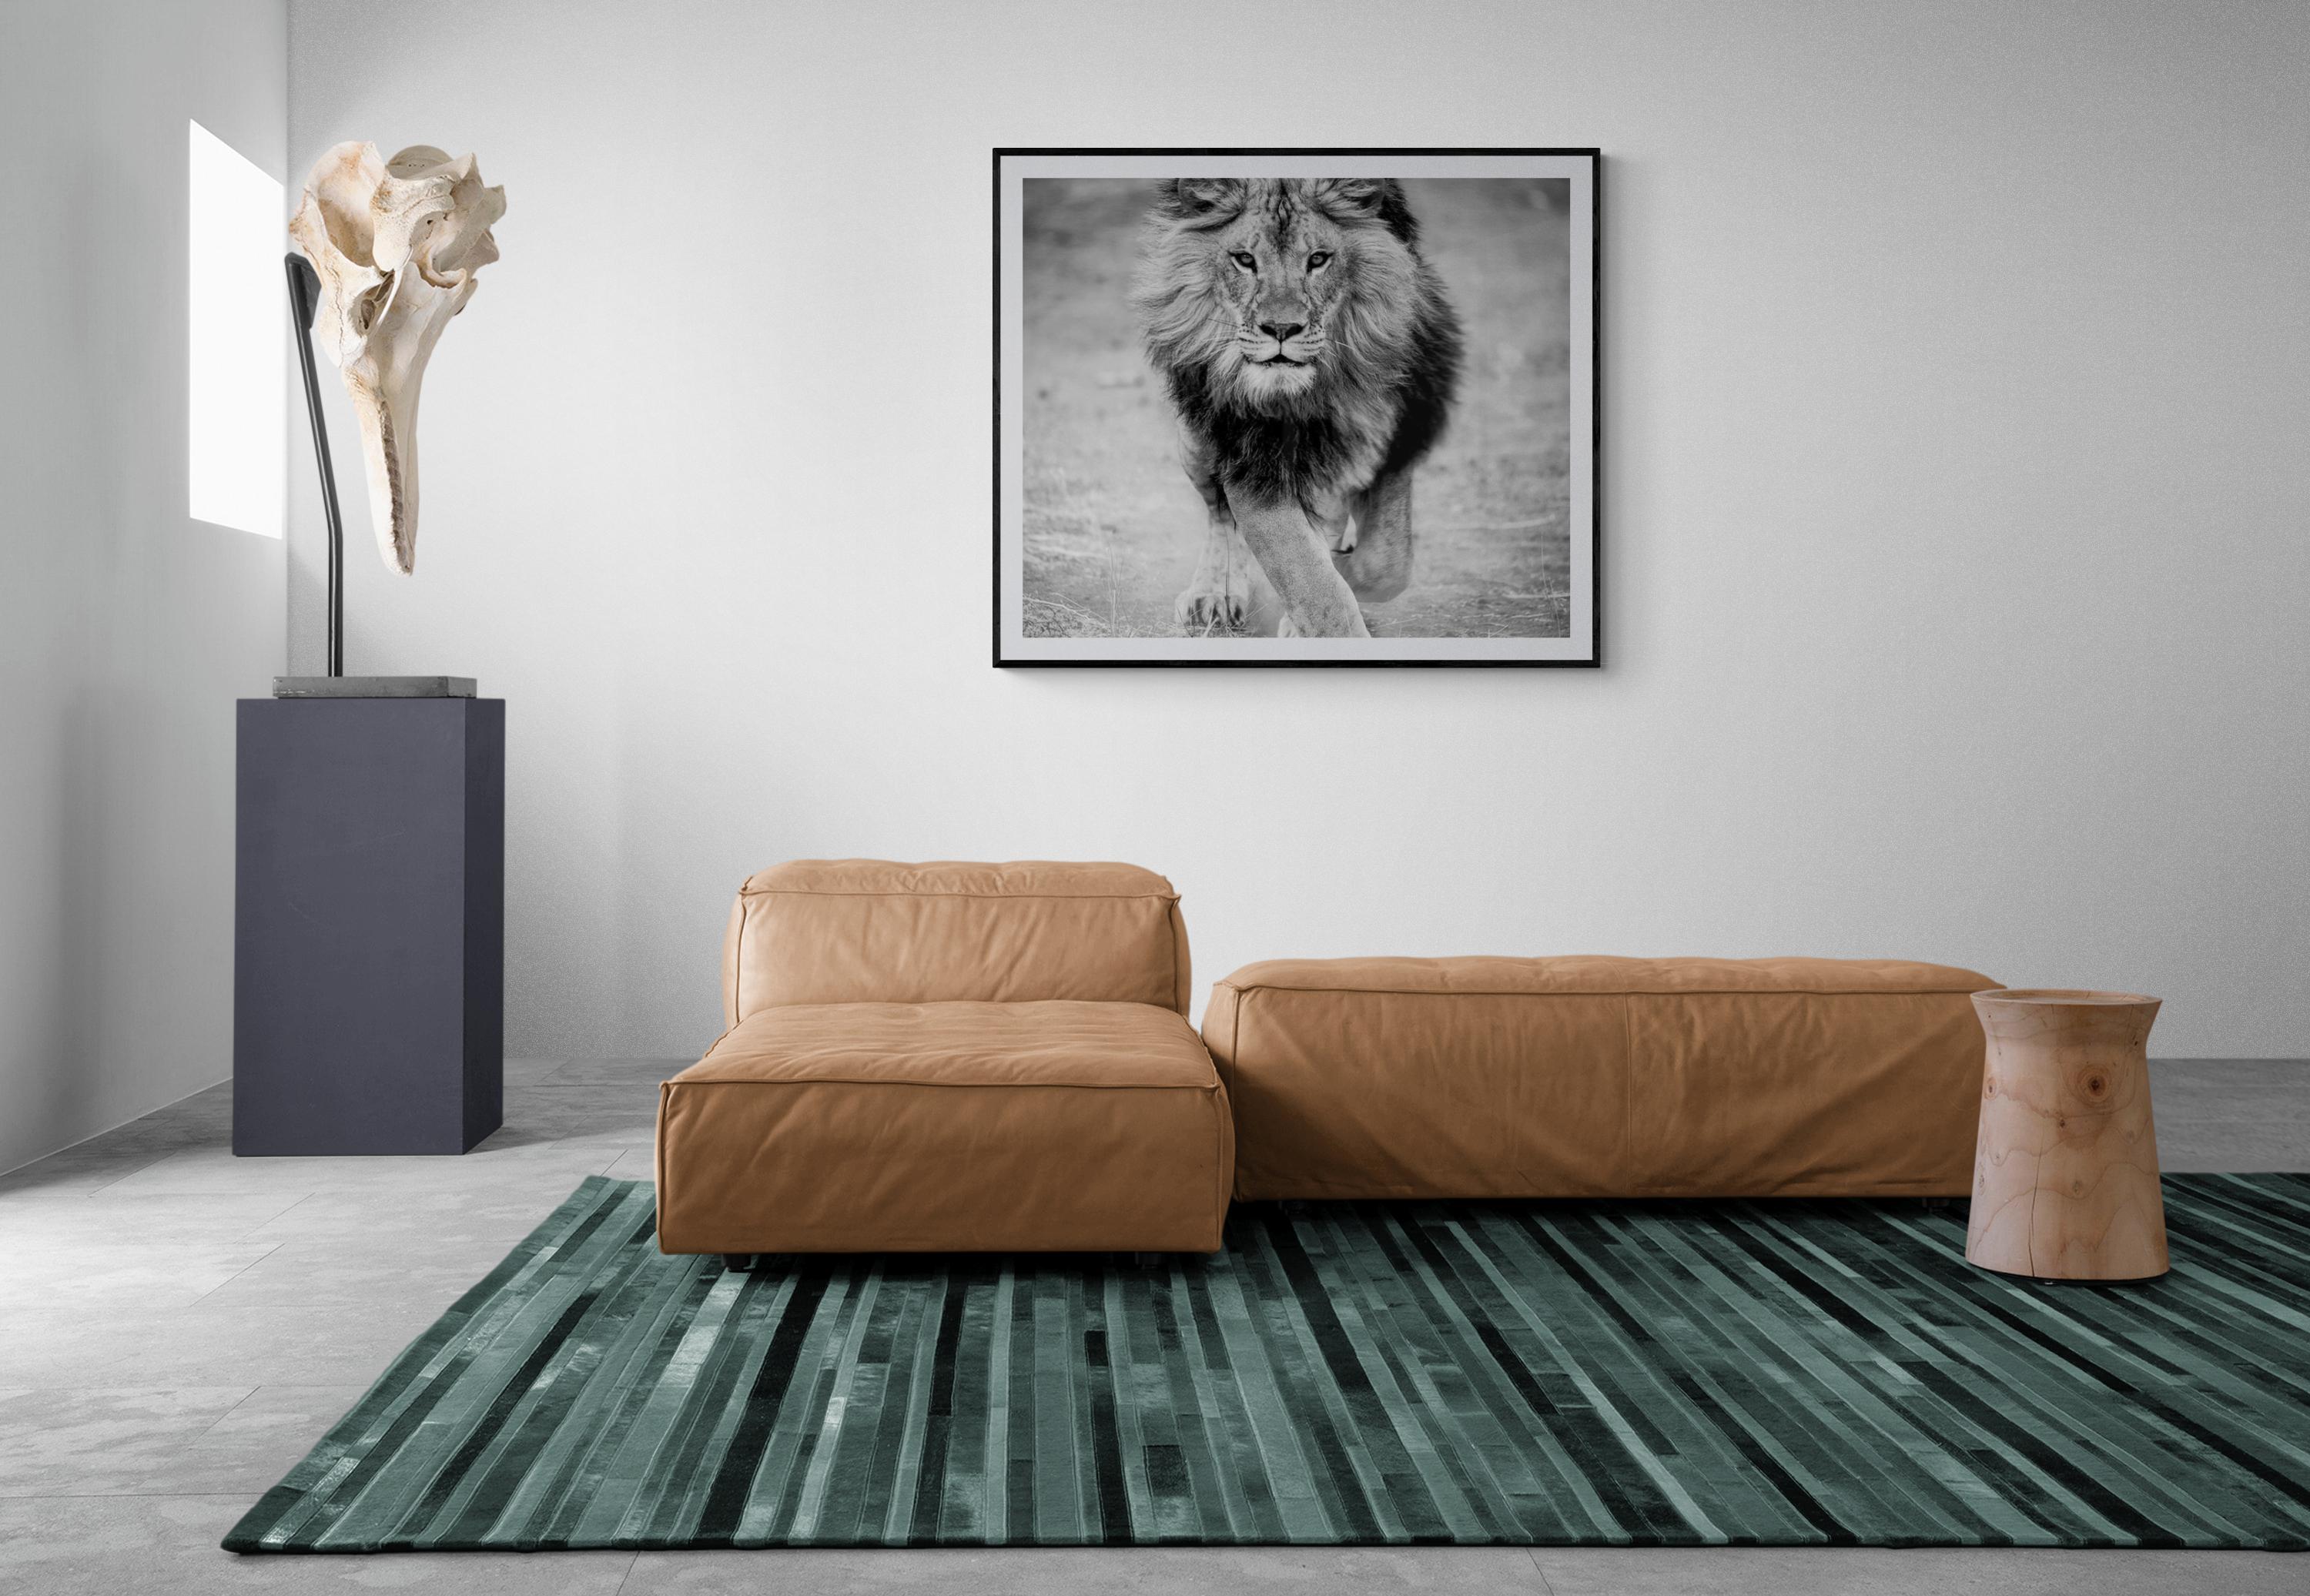 Panthera Leo - 40x60, Black and White Lion Photograph, Lion Photography Unsigned For Sale 4